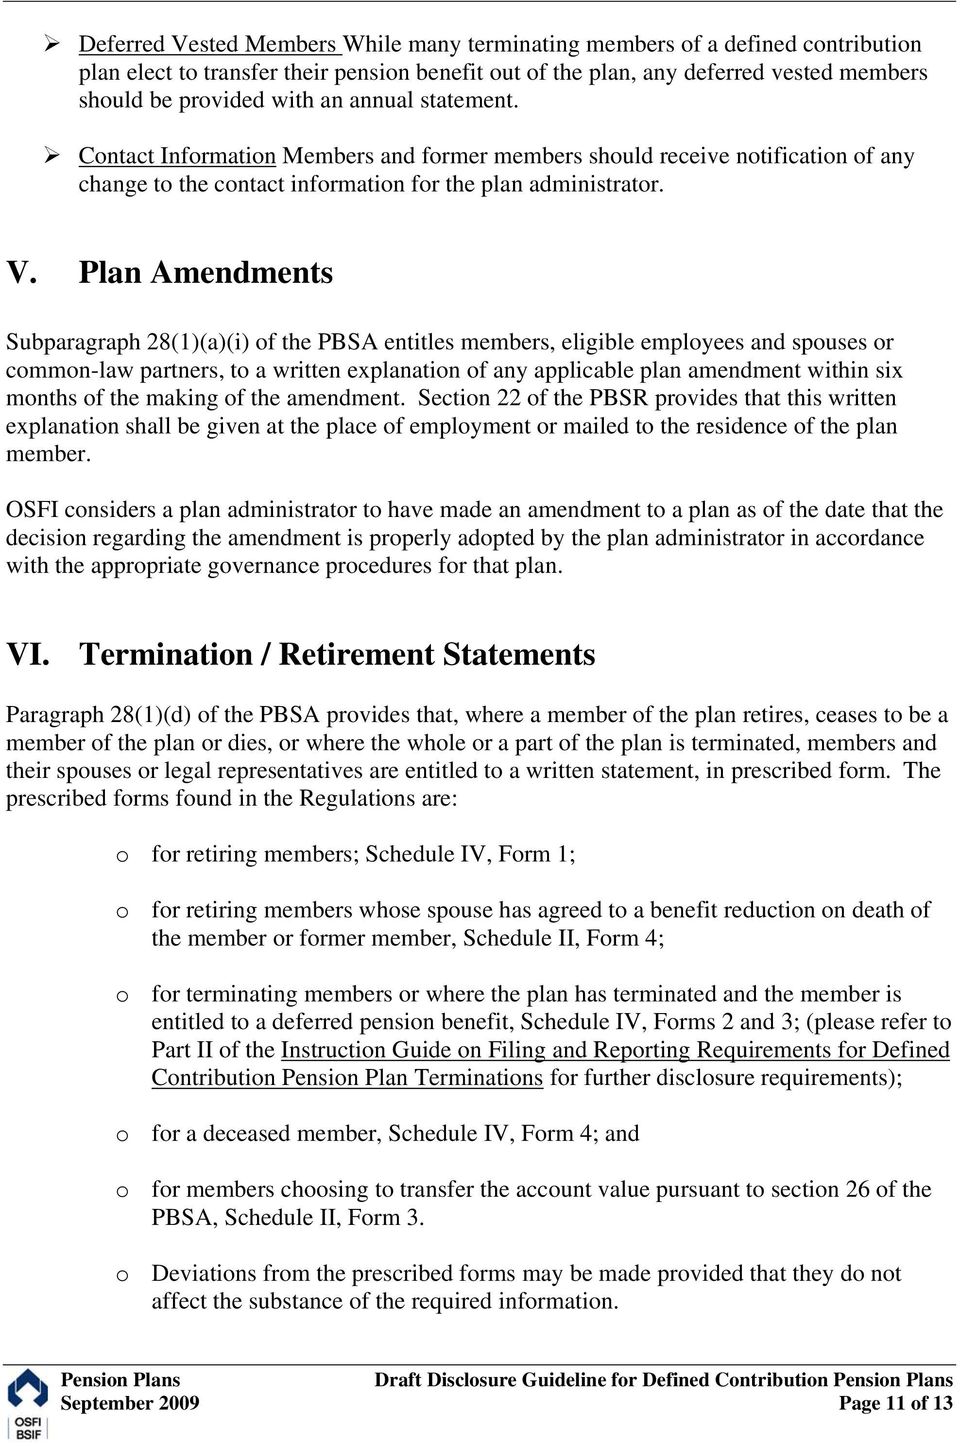 Plan Amendments Subparagraph 28(1)(a)(i) of the PBSA entitles members, eligible employees and spouses or common-law partners, to a written explanation of any applicable plan amendment within six